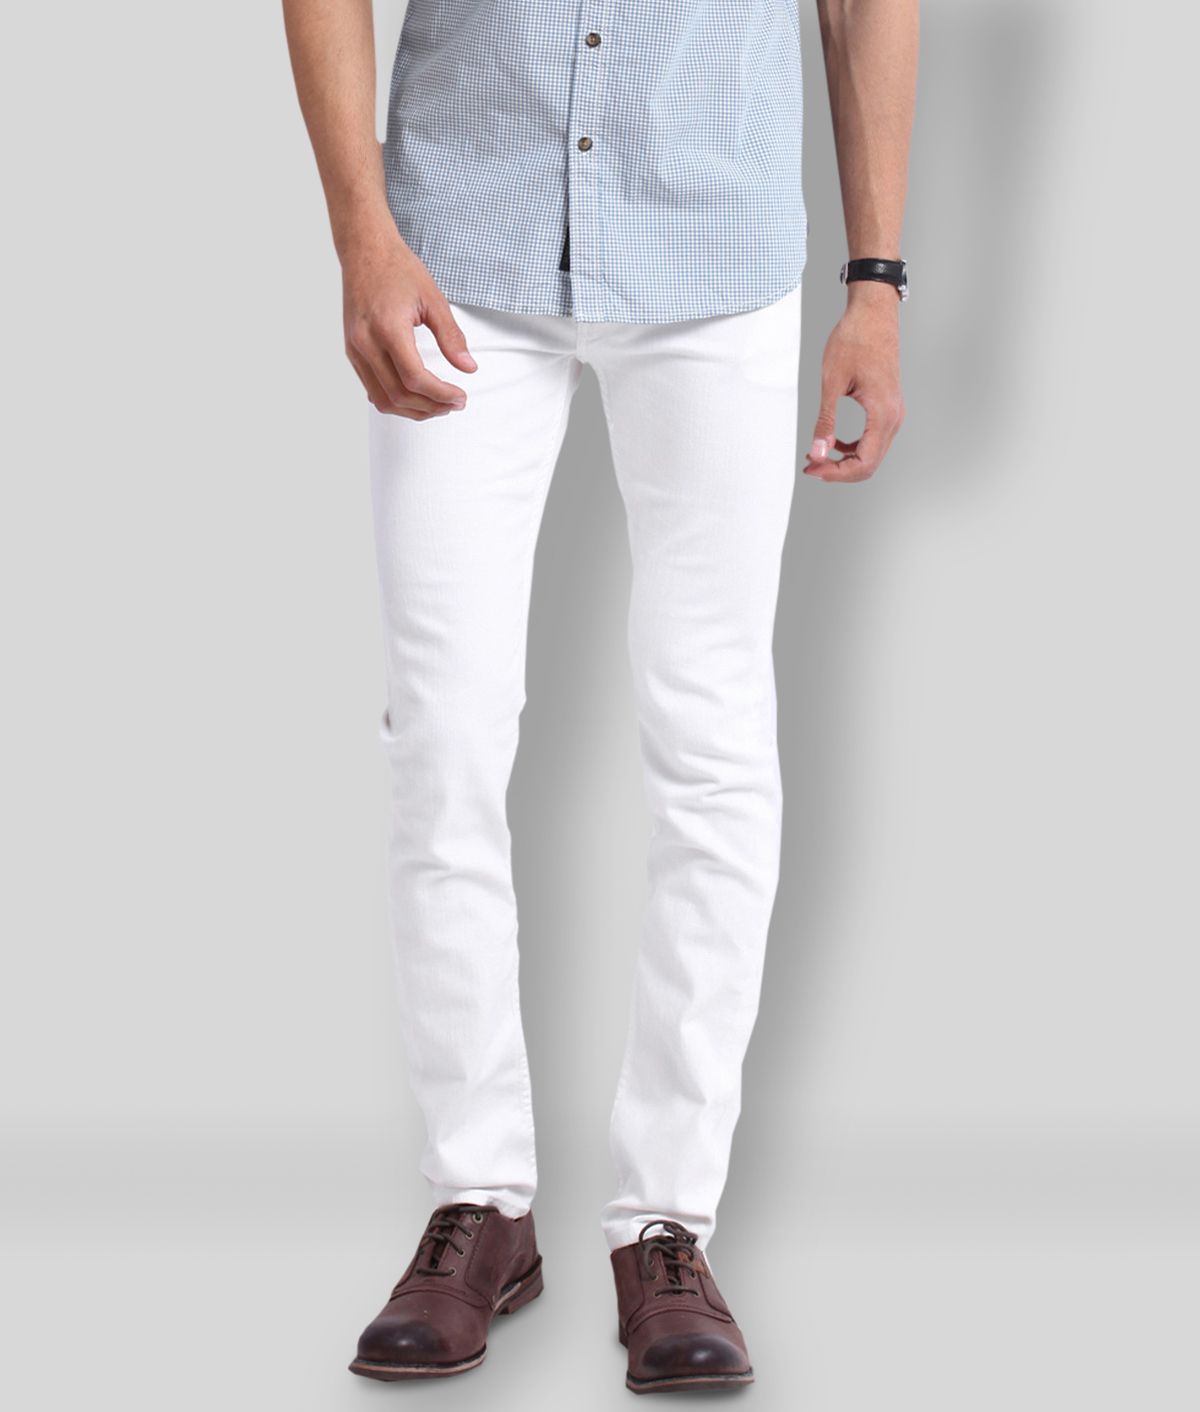     			X20 Jeans - White Cotton Blend Slim Fit Men's Jeans ( Pack of 1 )